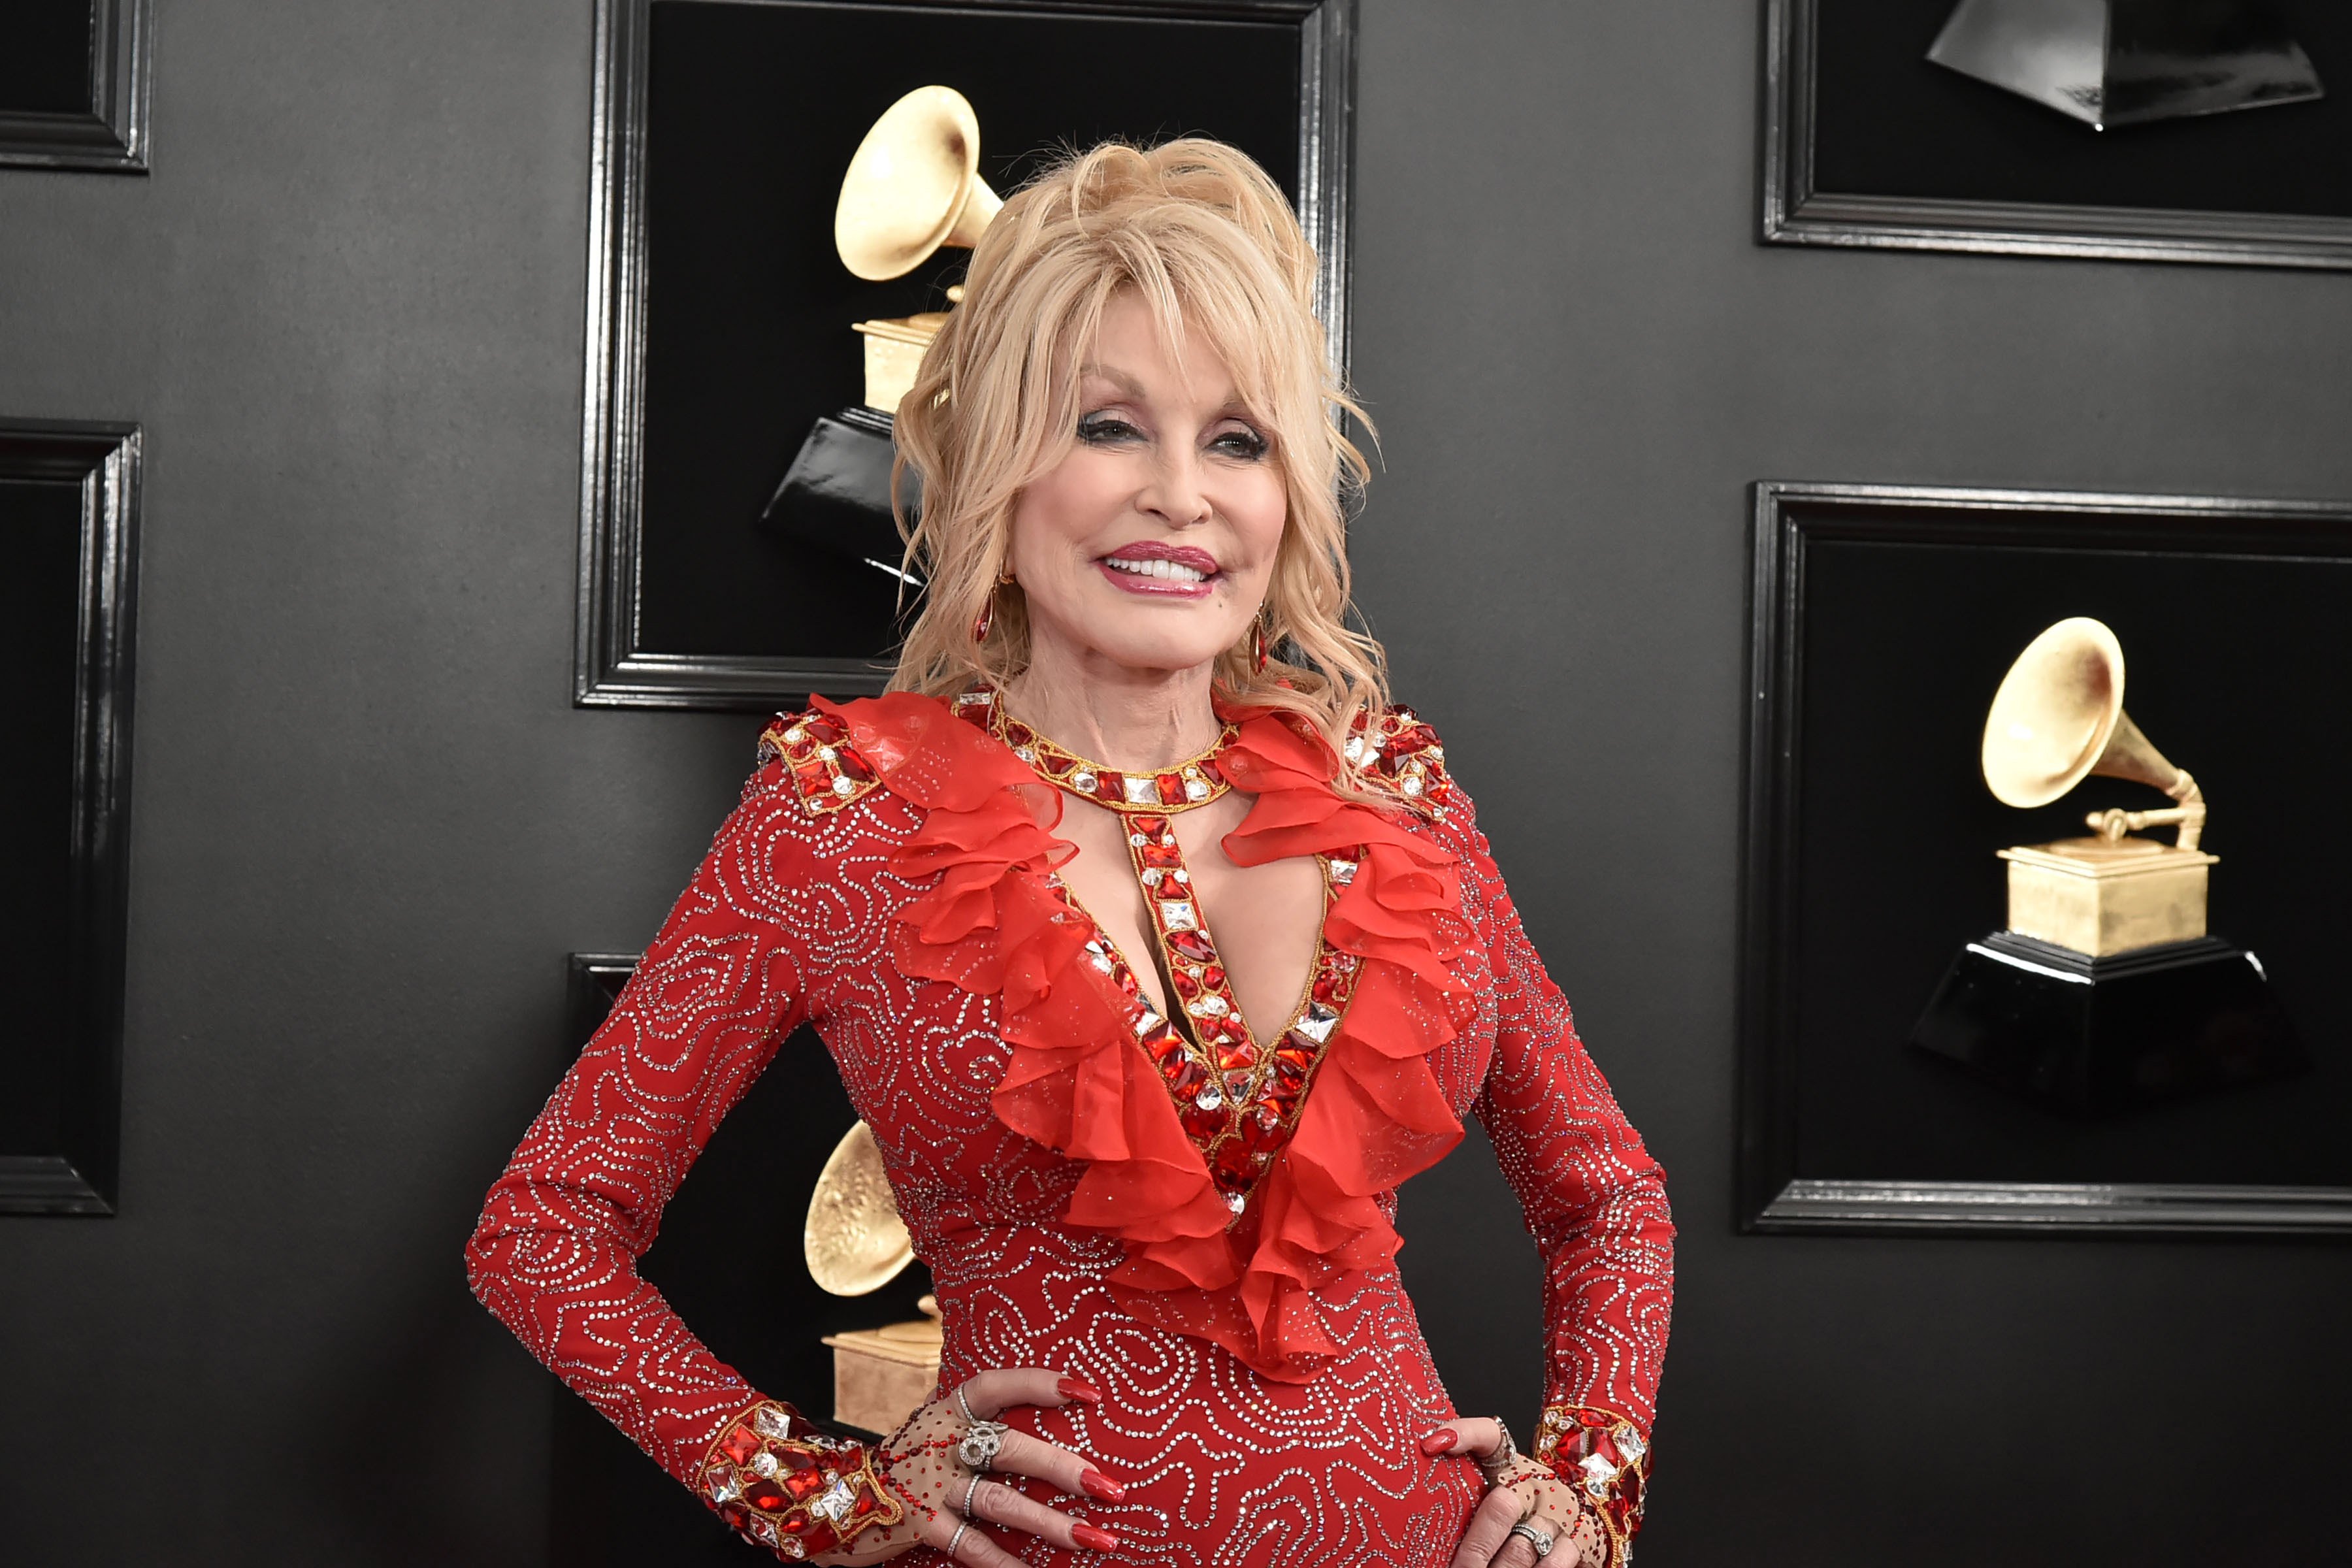 Dolly Parton on the red carpet in a red dress.